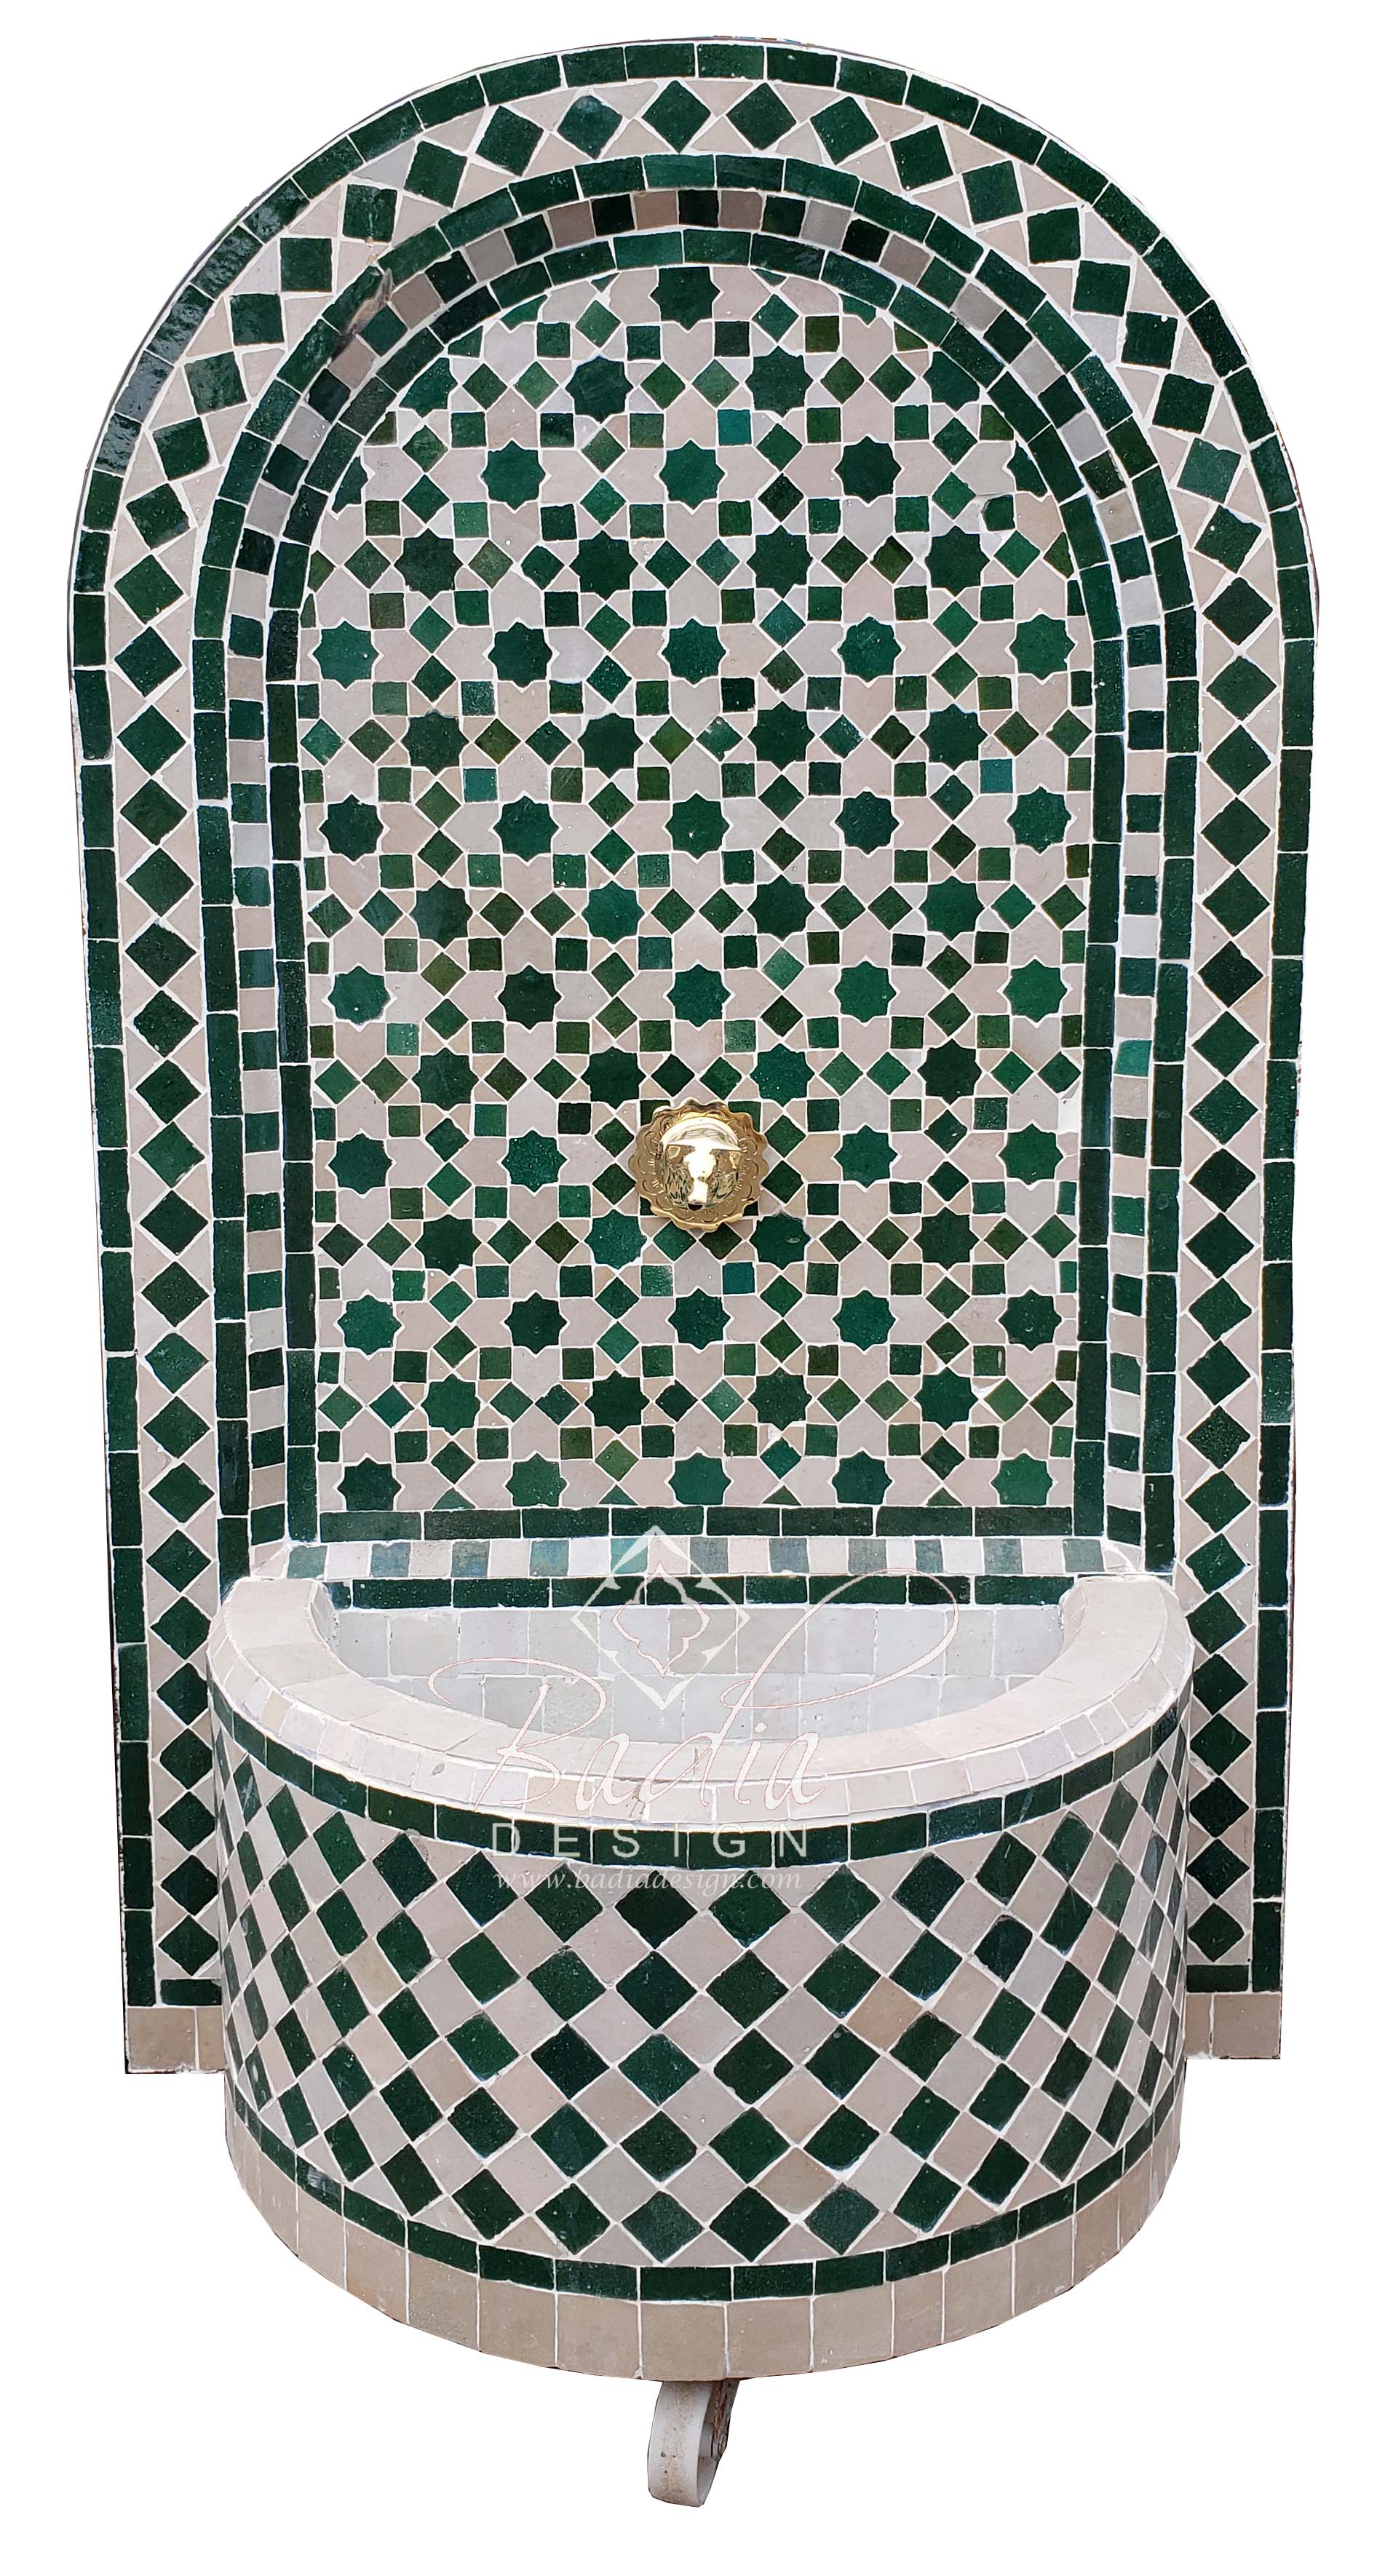 green-and-beige-moroccan-mosaic-tile-water-fountain-mf707.jpg